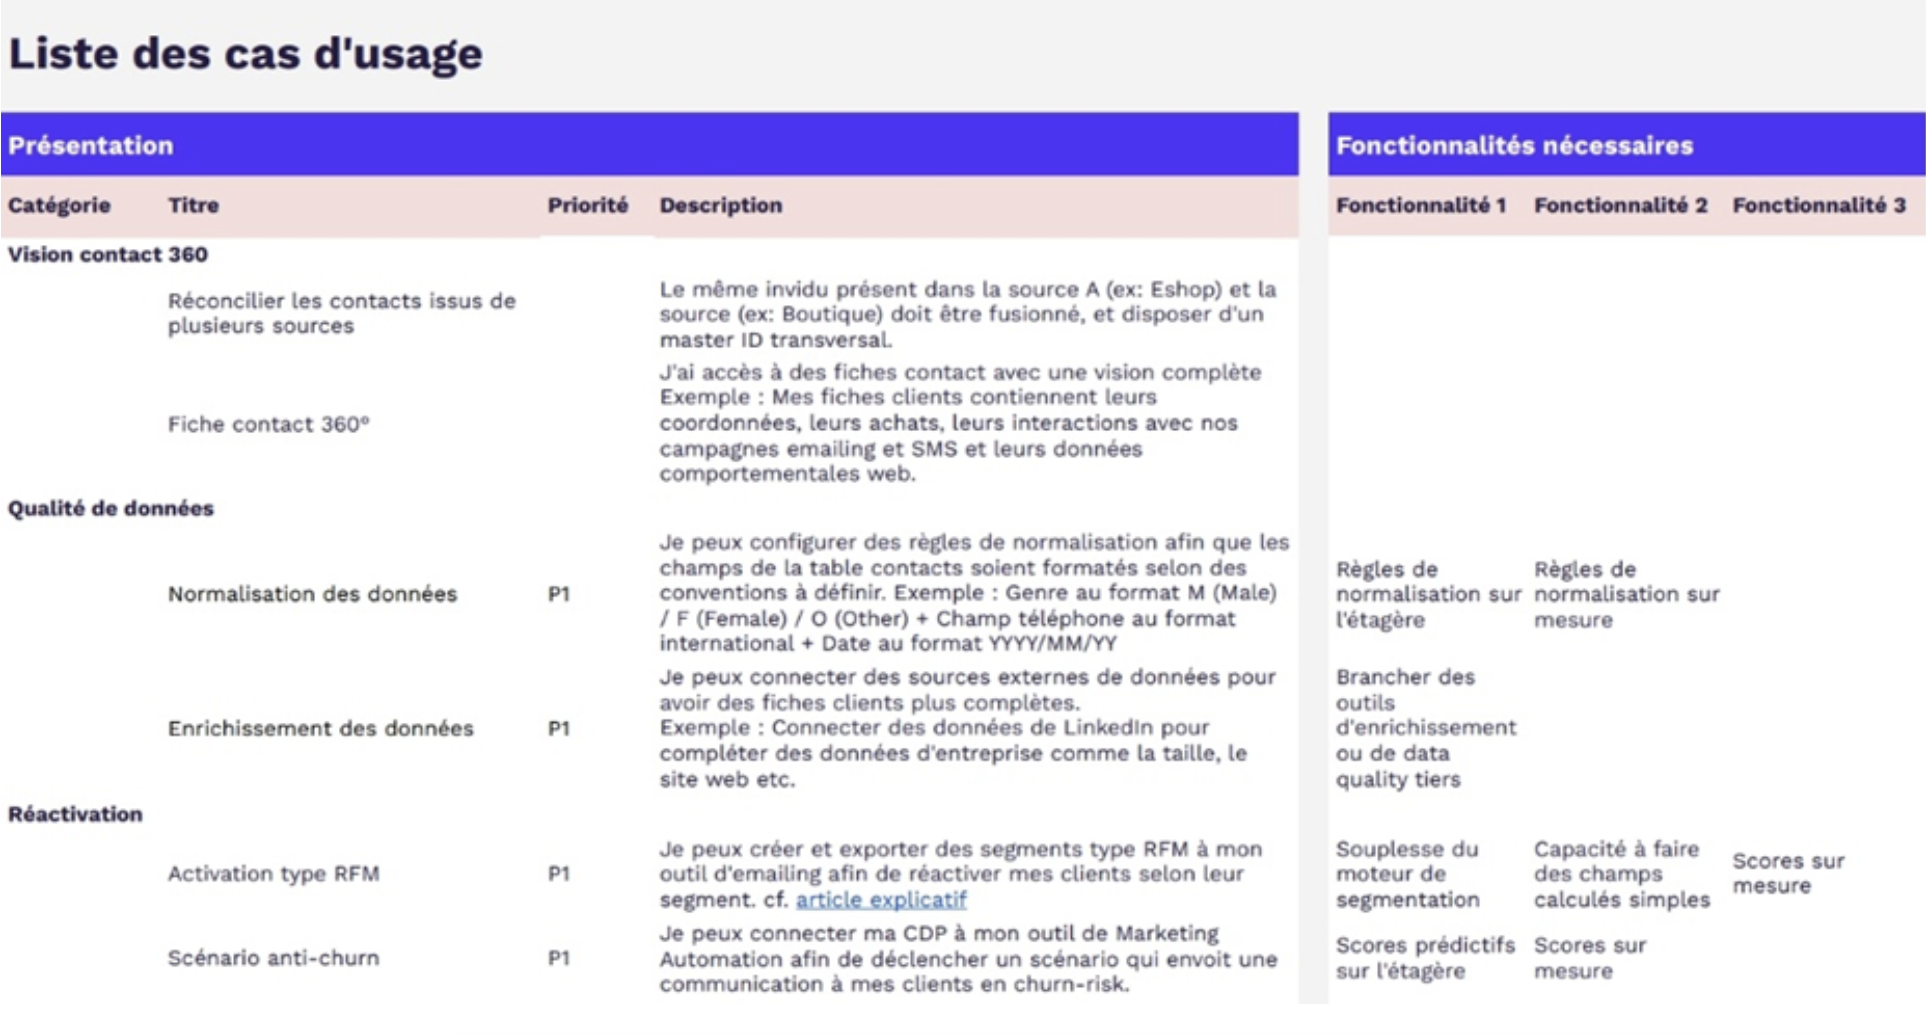 /wp-content/uploads/2022/02/modele-cahier-des-charges-cdp-cas-usages.png